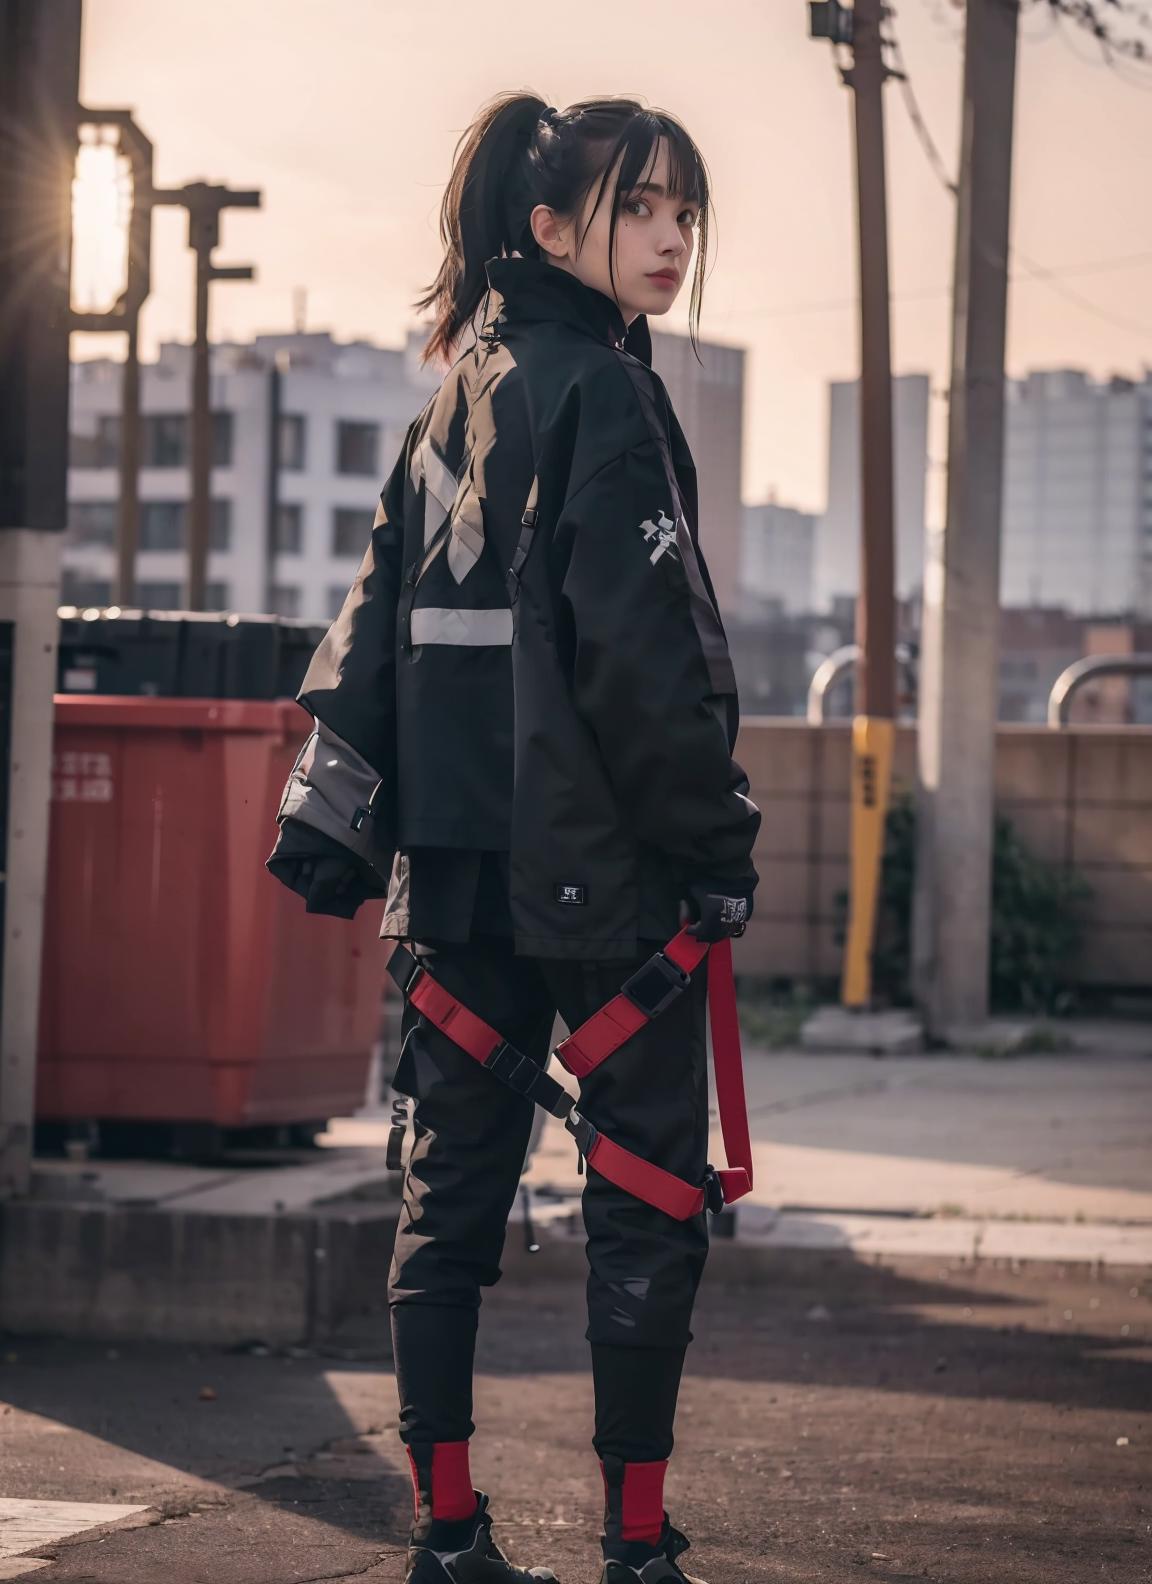 A girl in a black jacket and pants with a red belt and holster.